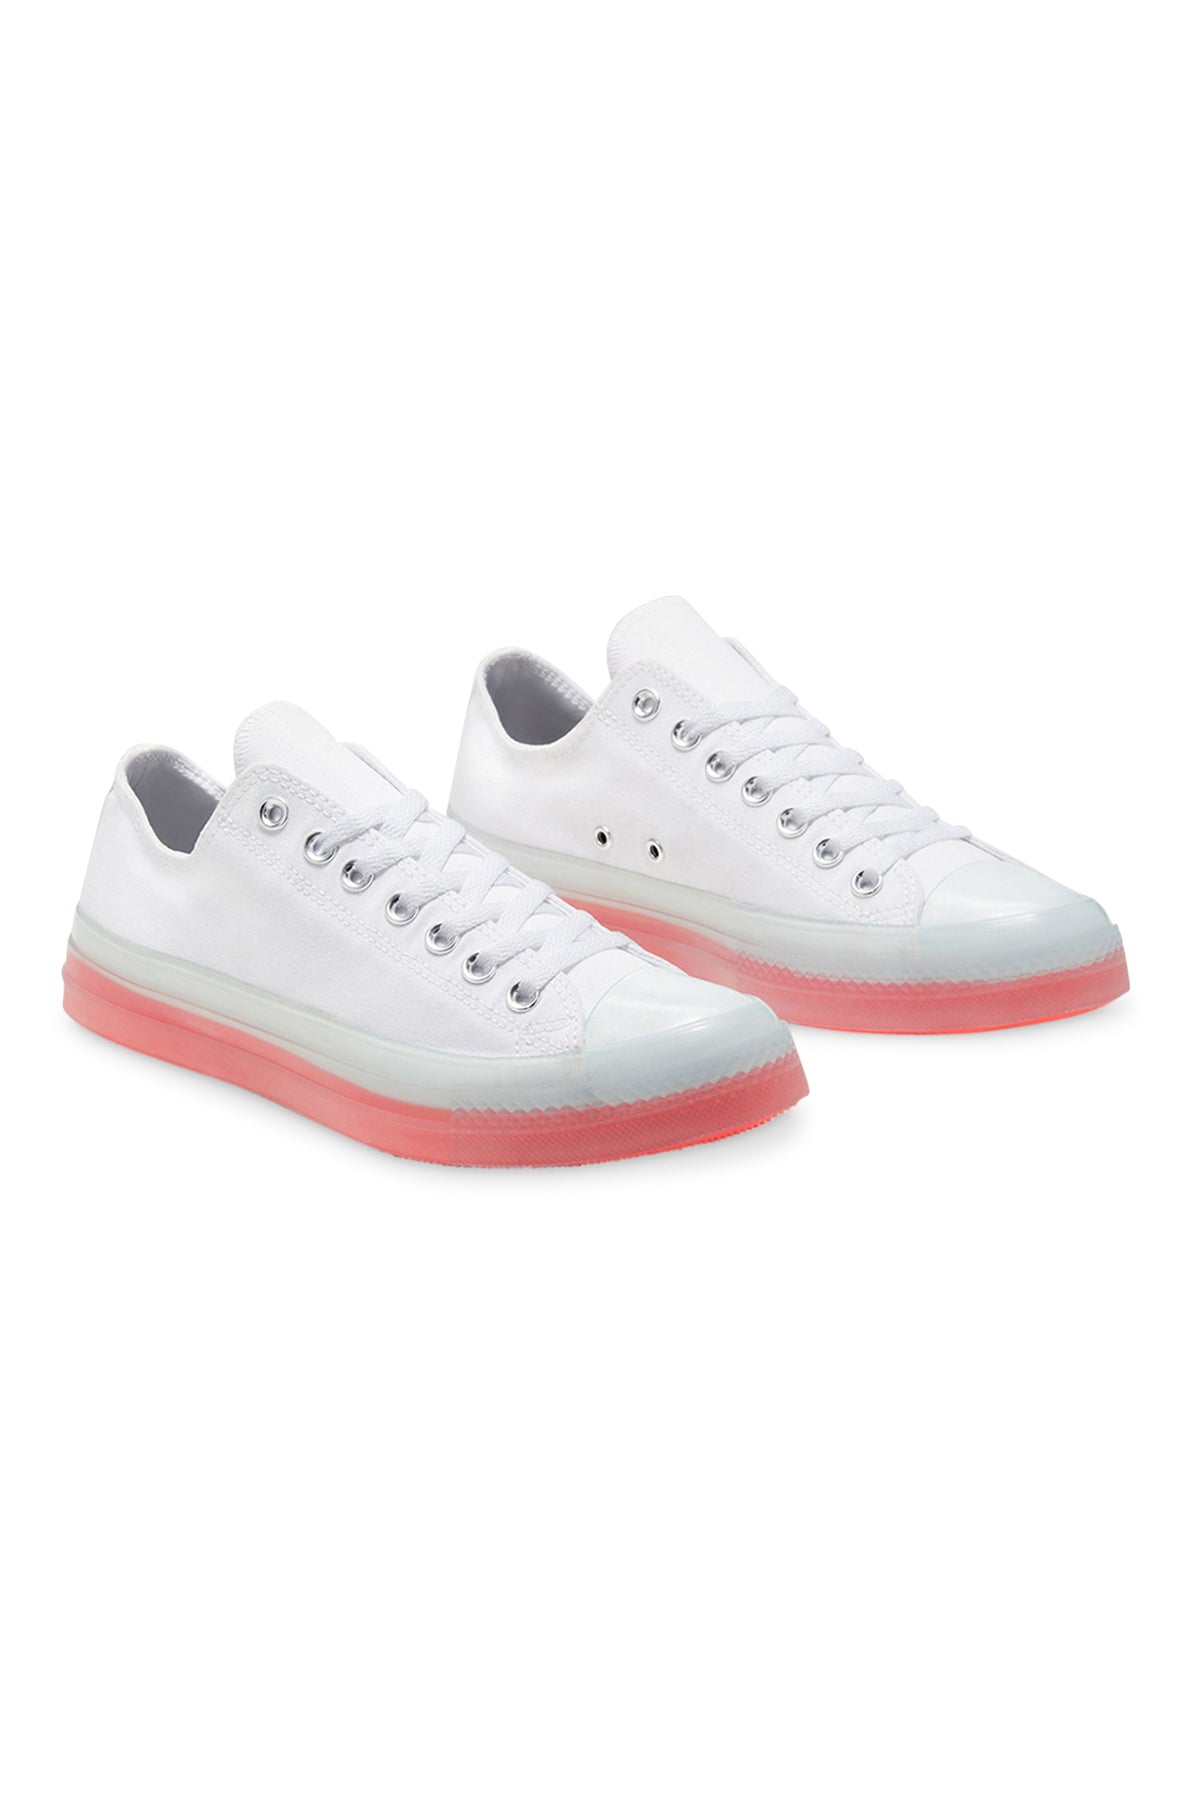 Converse CT CX Low Top White/Clear/Wild Mango Angle